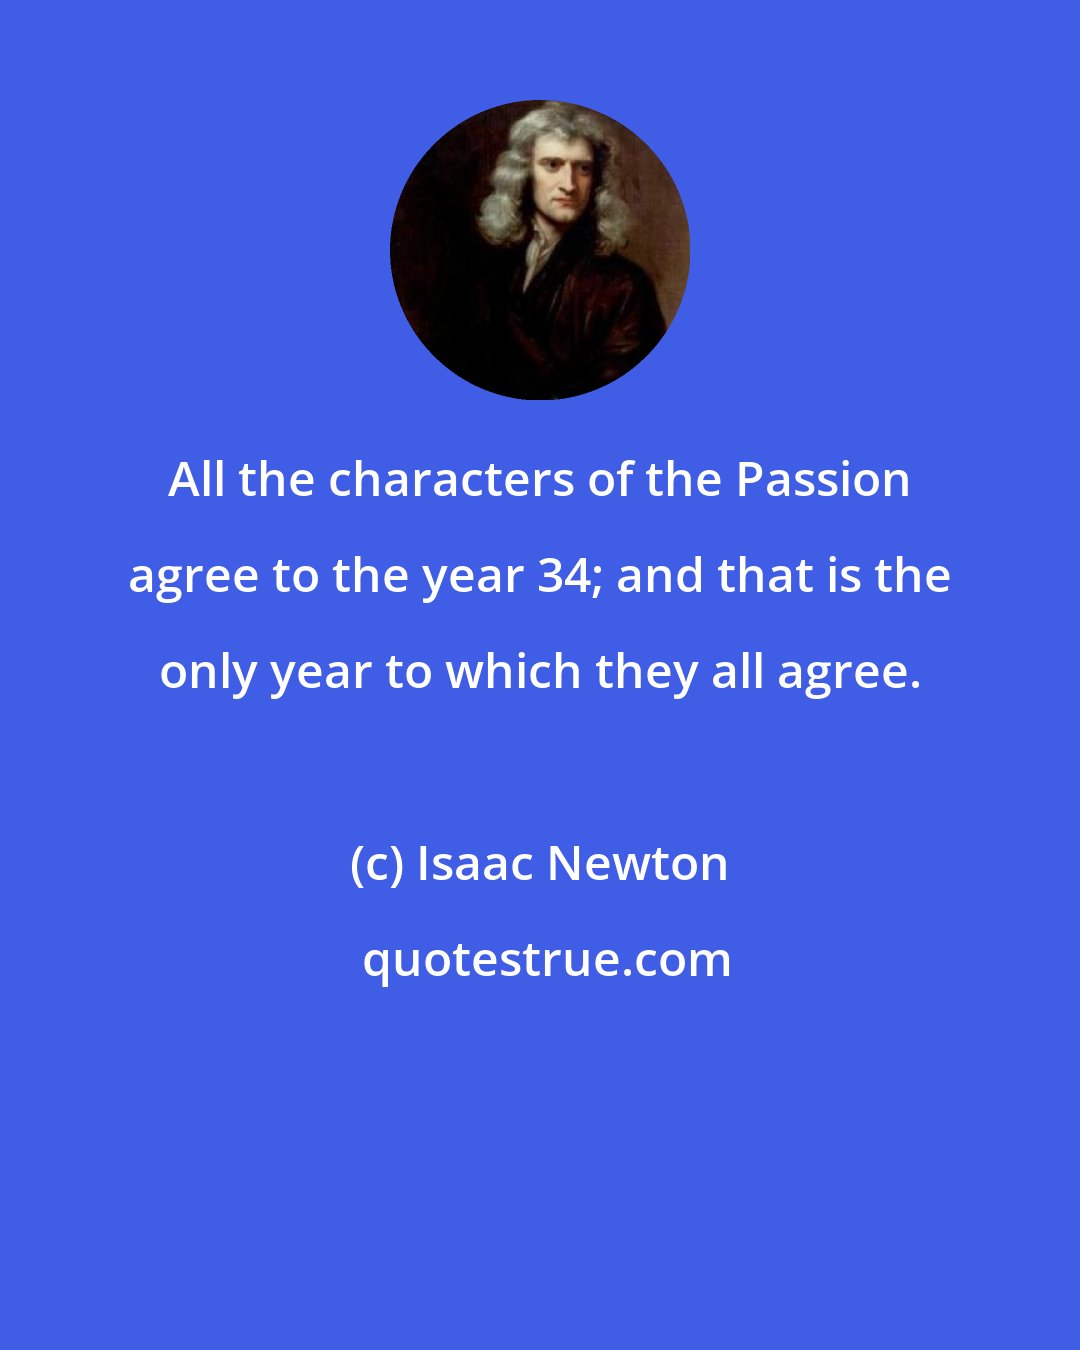 Isaac Newton: All the characters of the Passion agree to the year 34; and that is the only year to which they all agree.